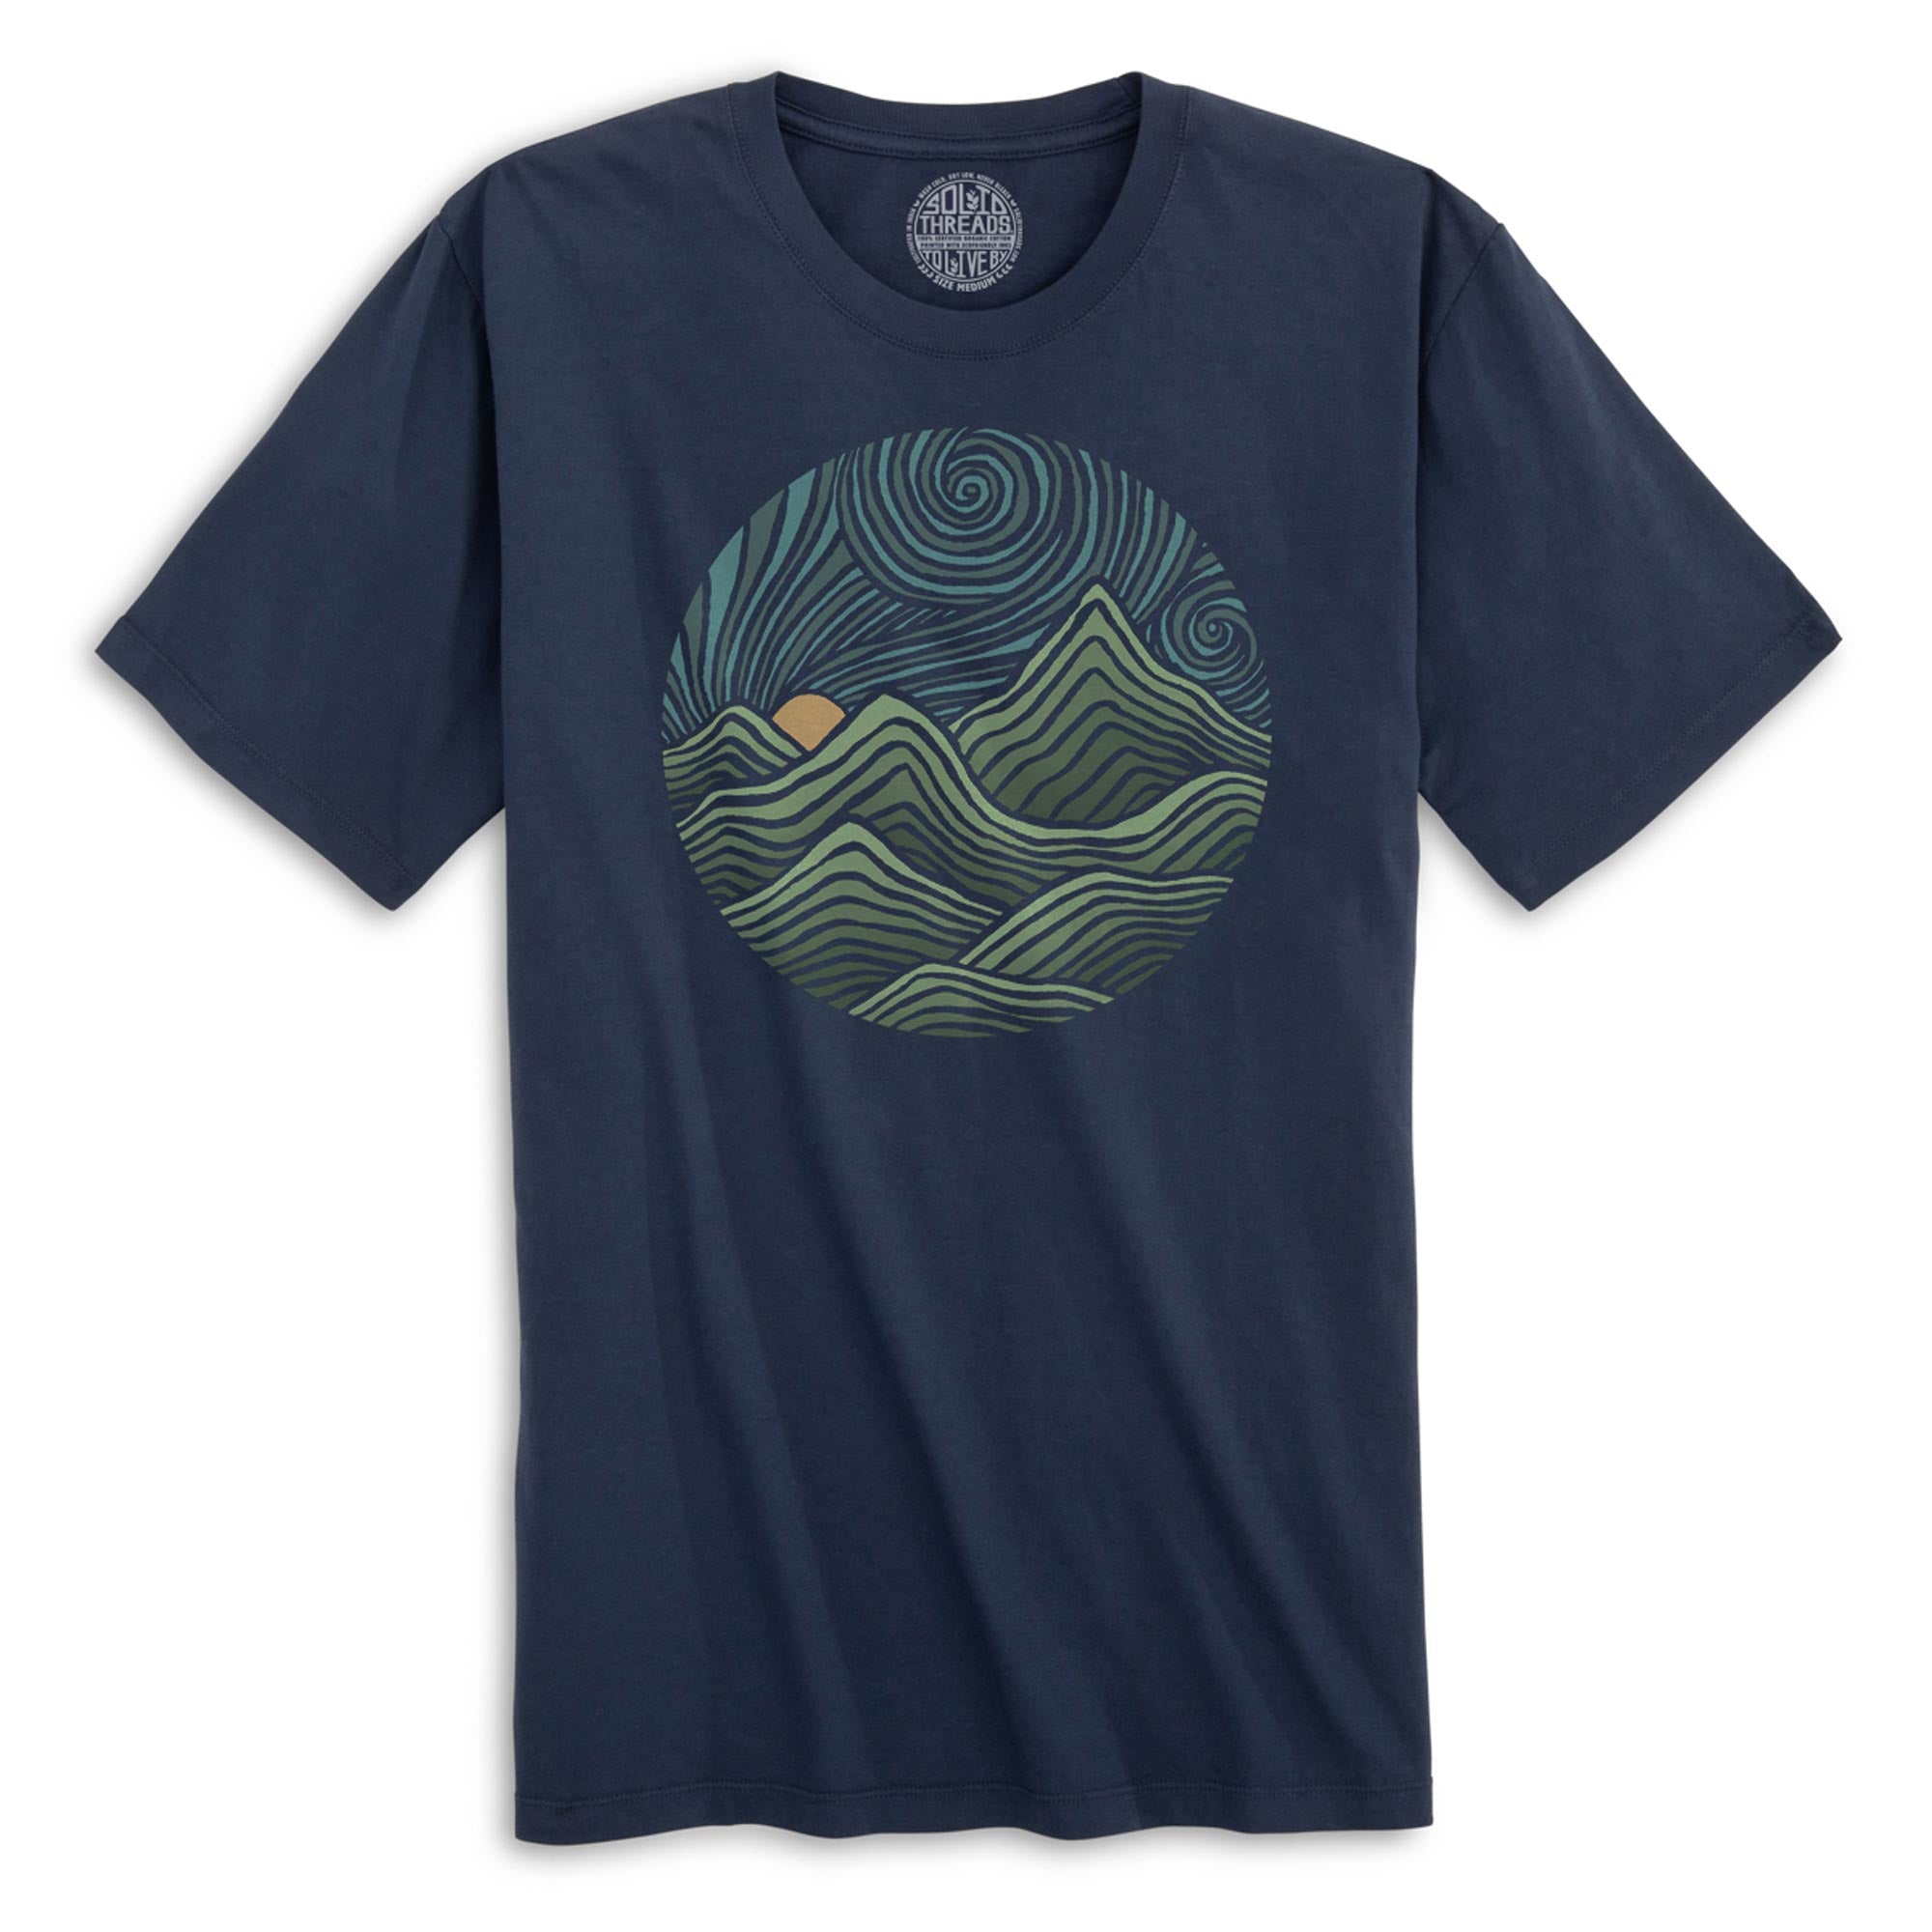 Swirly Mountains | Design By Dylan Fant Cool Organic Cotton T-shirt | Vintage Artsy Nature Tee | Solid Threads